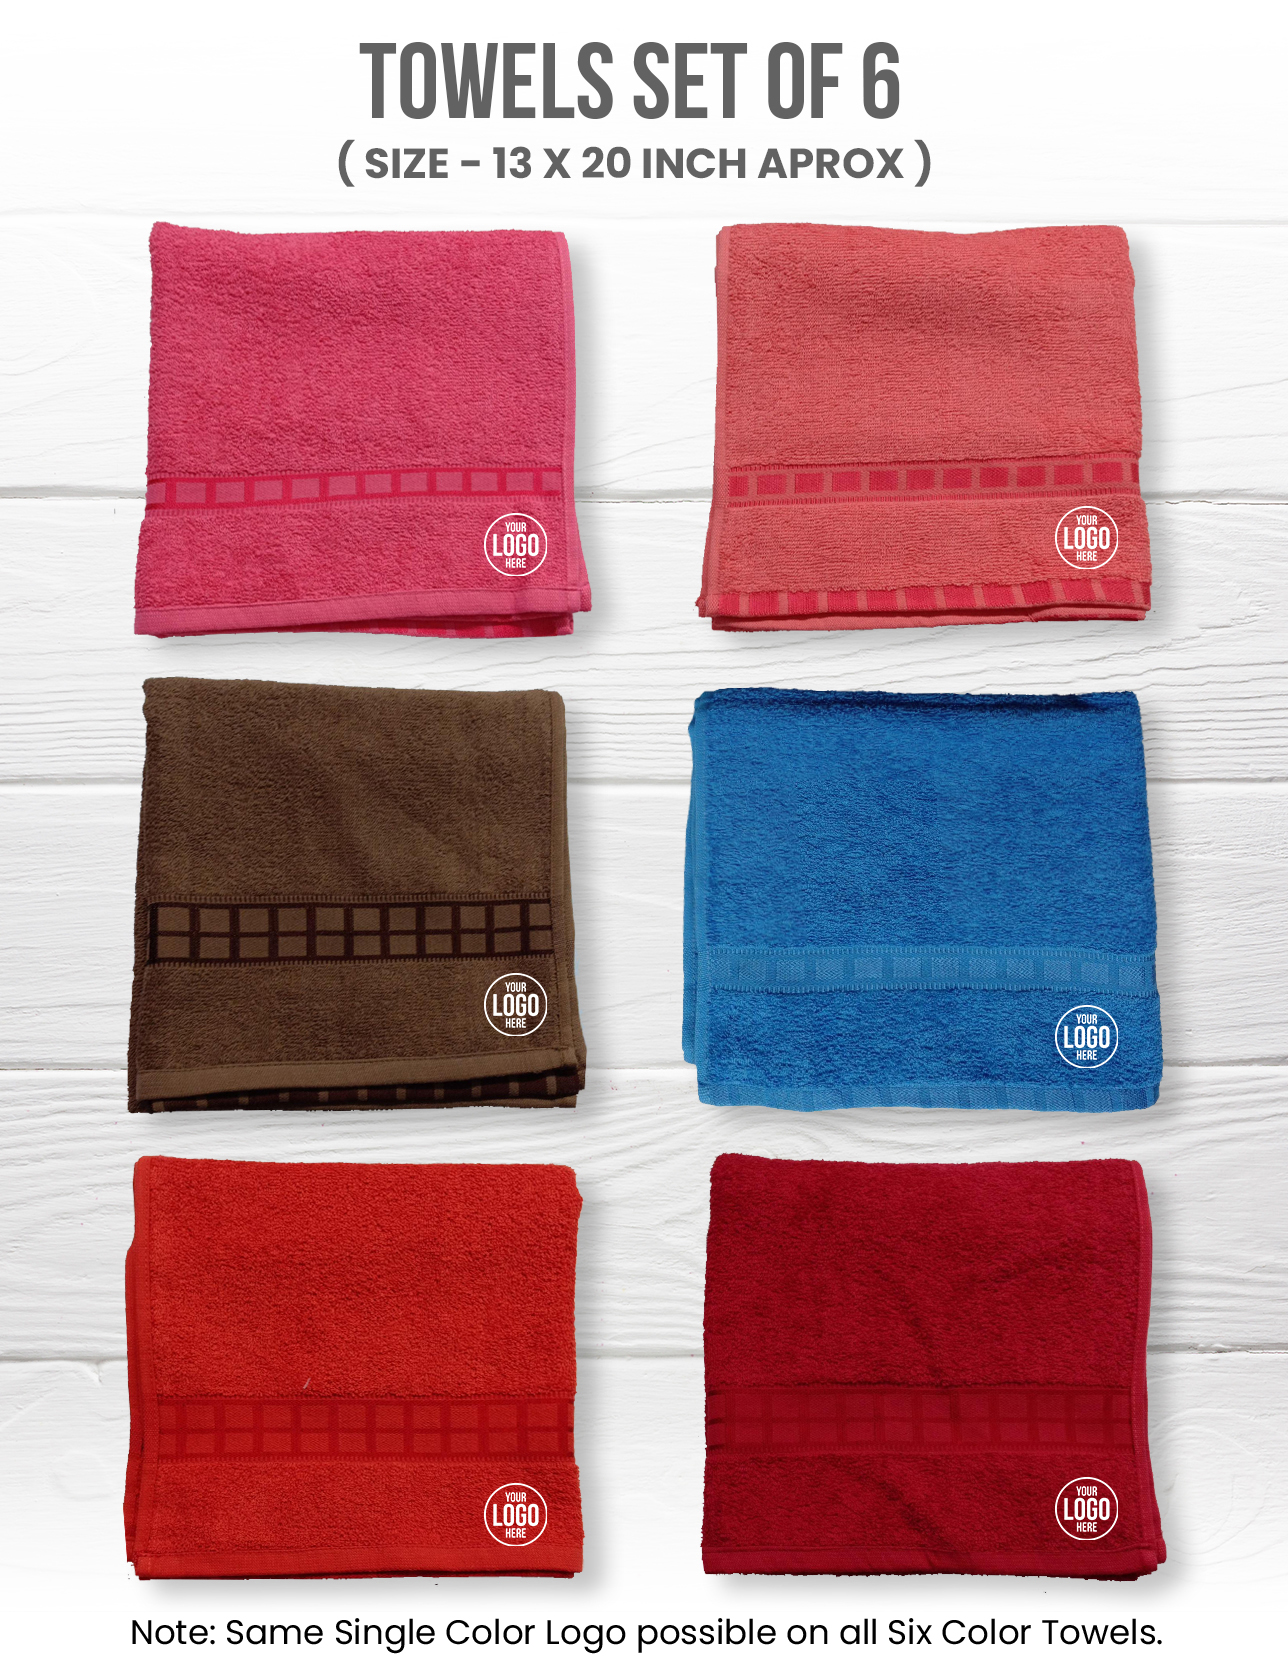 Multicolor Towel Pack of 6 Pcs  - 13 x 20 Inch (Approx)